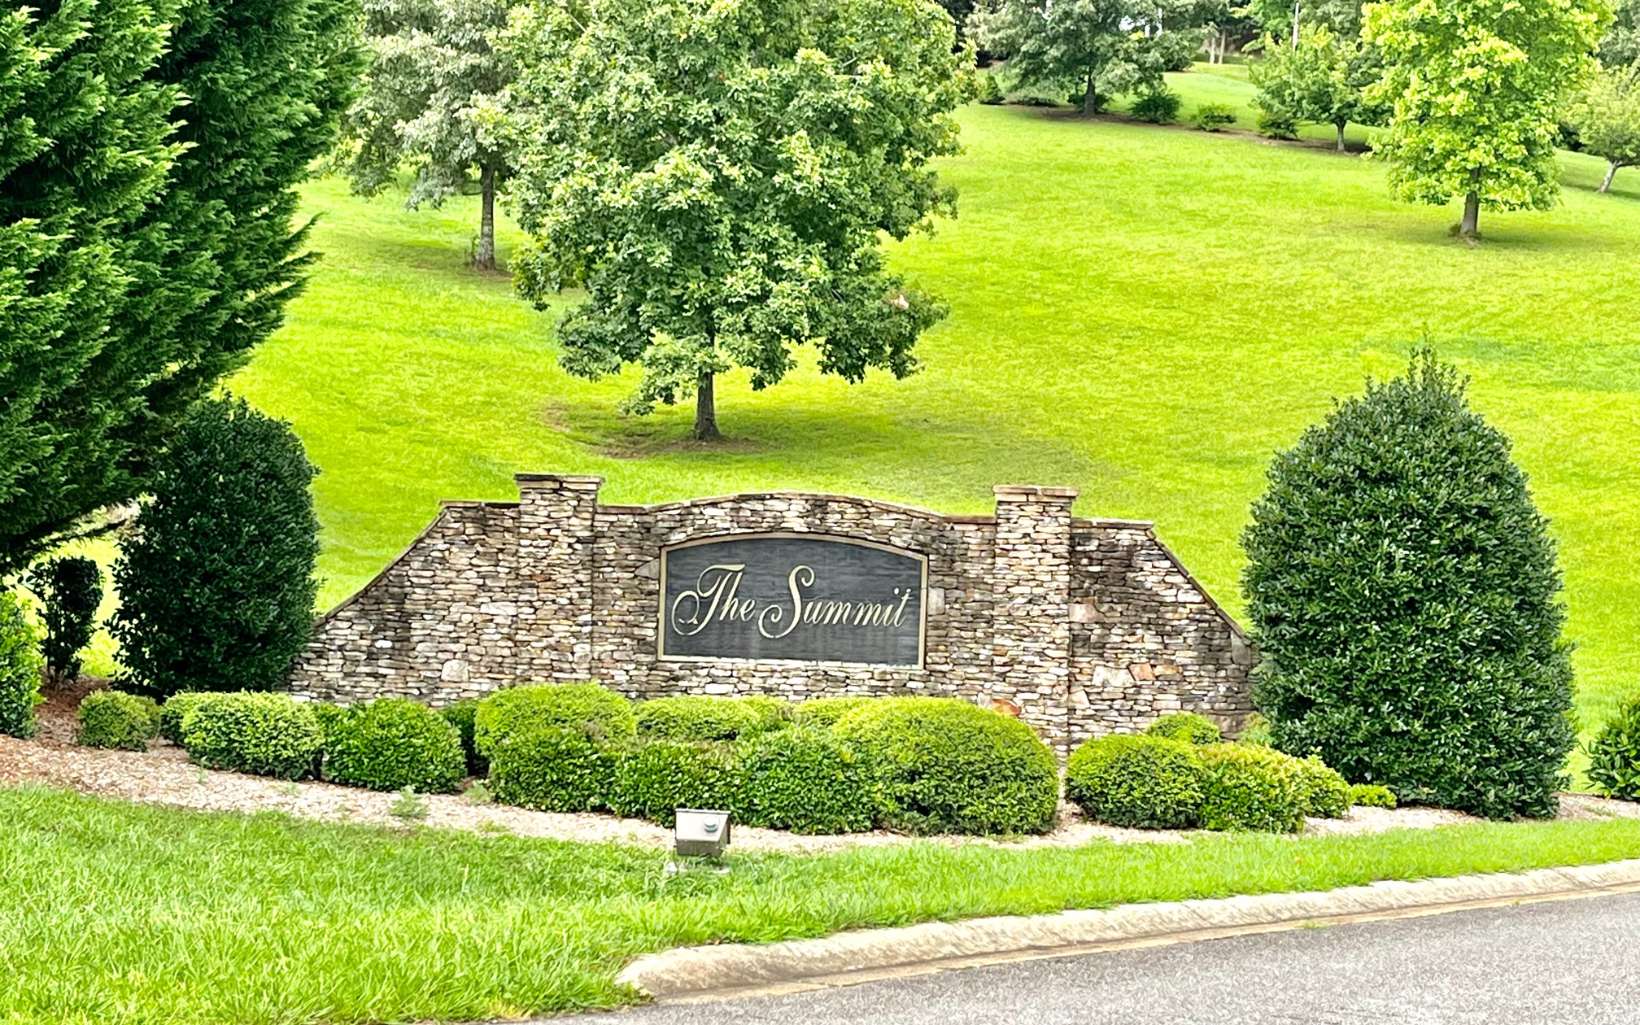 Have you been searching for the perfect lot to build your long awaited mountain home on? Come check out The Summit located in beautiful Union County. Underground utilities and all paved access and this lot is located on a quite cul de sac. Conveniently located between Blairsville and Blue Ridge. Come check out THE SUMMIT and you will know that you have come home to the mountains.